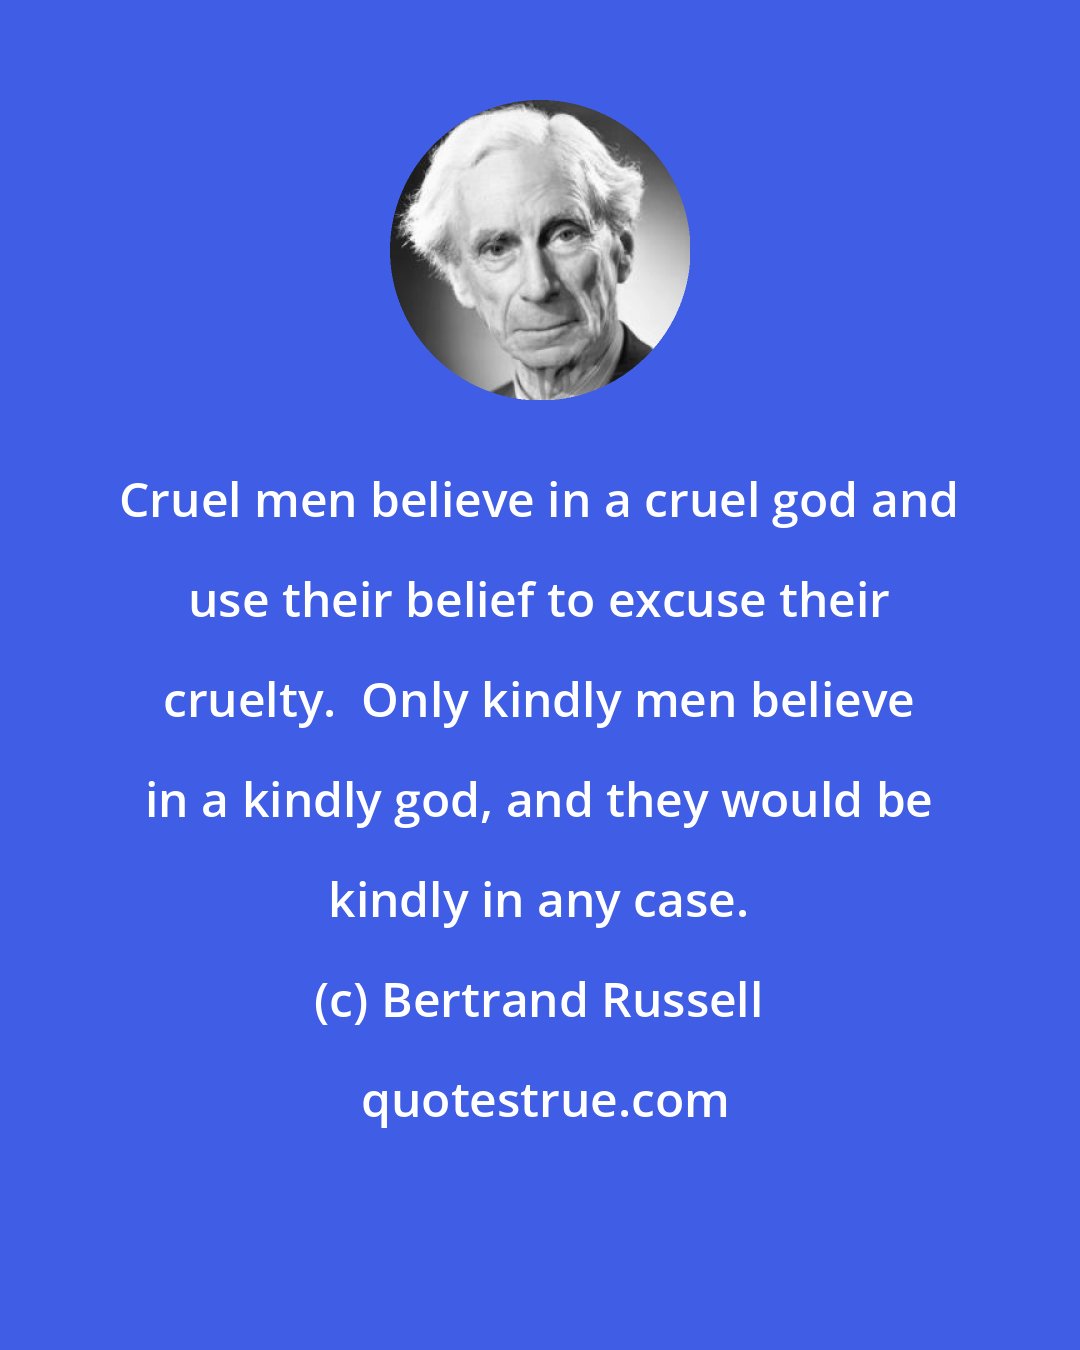 Bertrand Russell: Cruel men believe in a cruel god and use their belief to excuse their cruelty.  Only kindly men believe in a kindly god, and they would be kindly in any case.